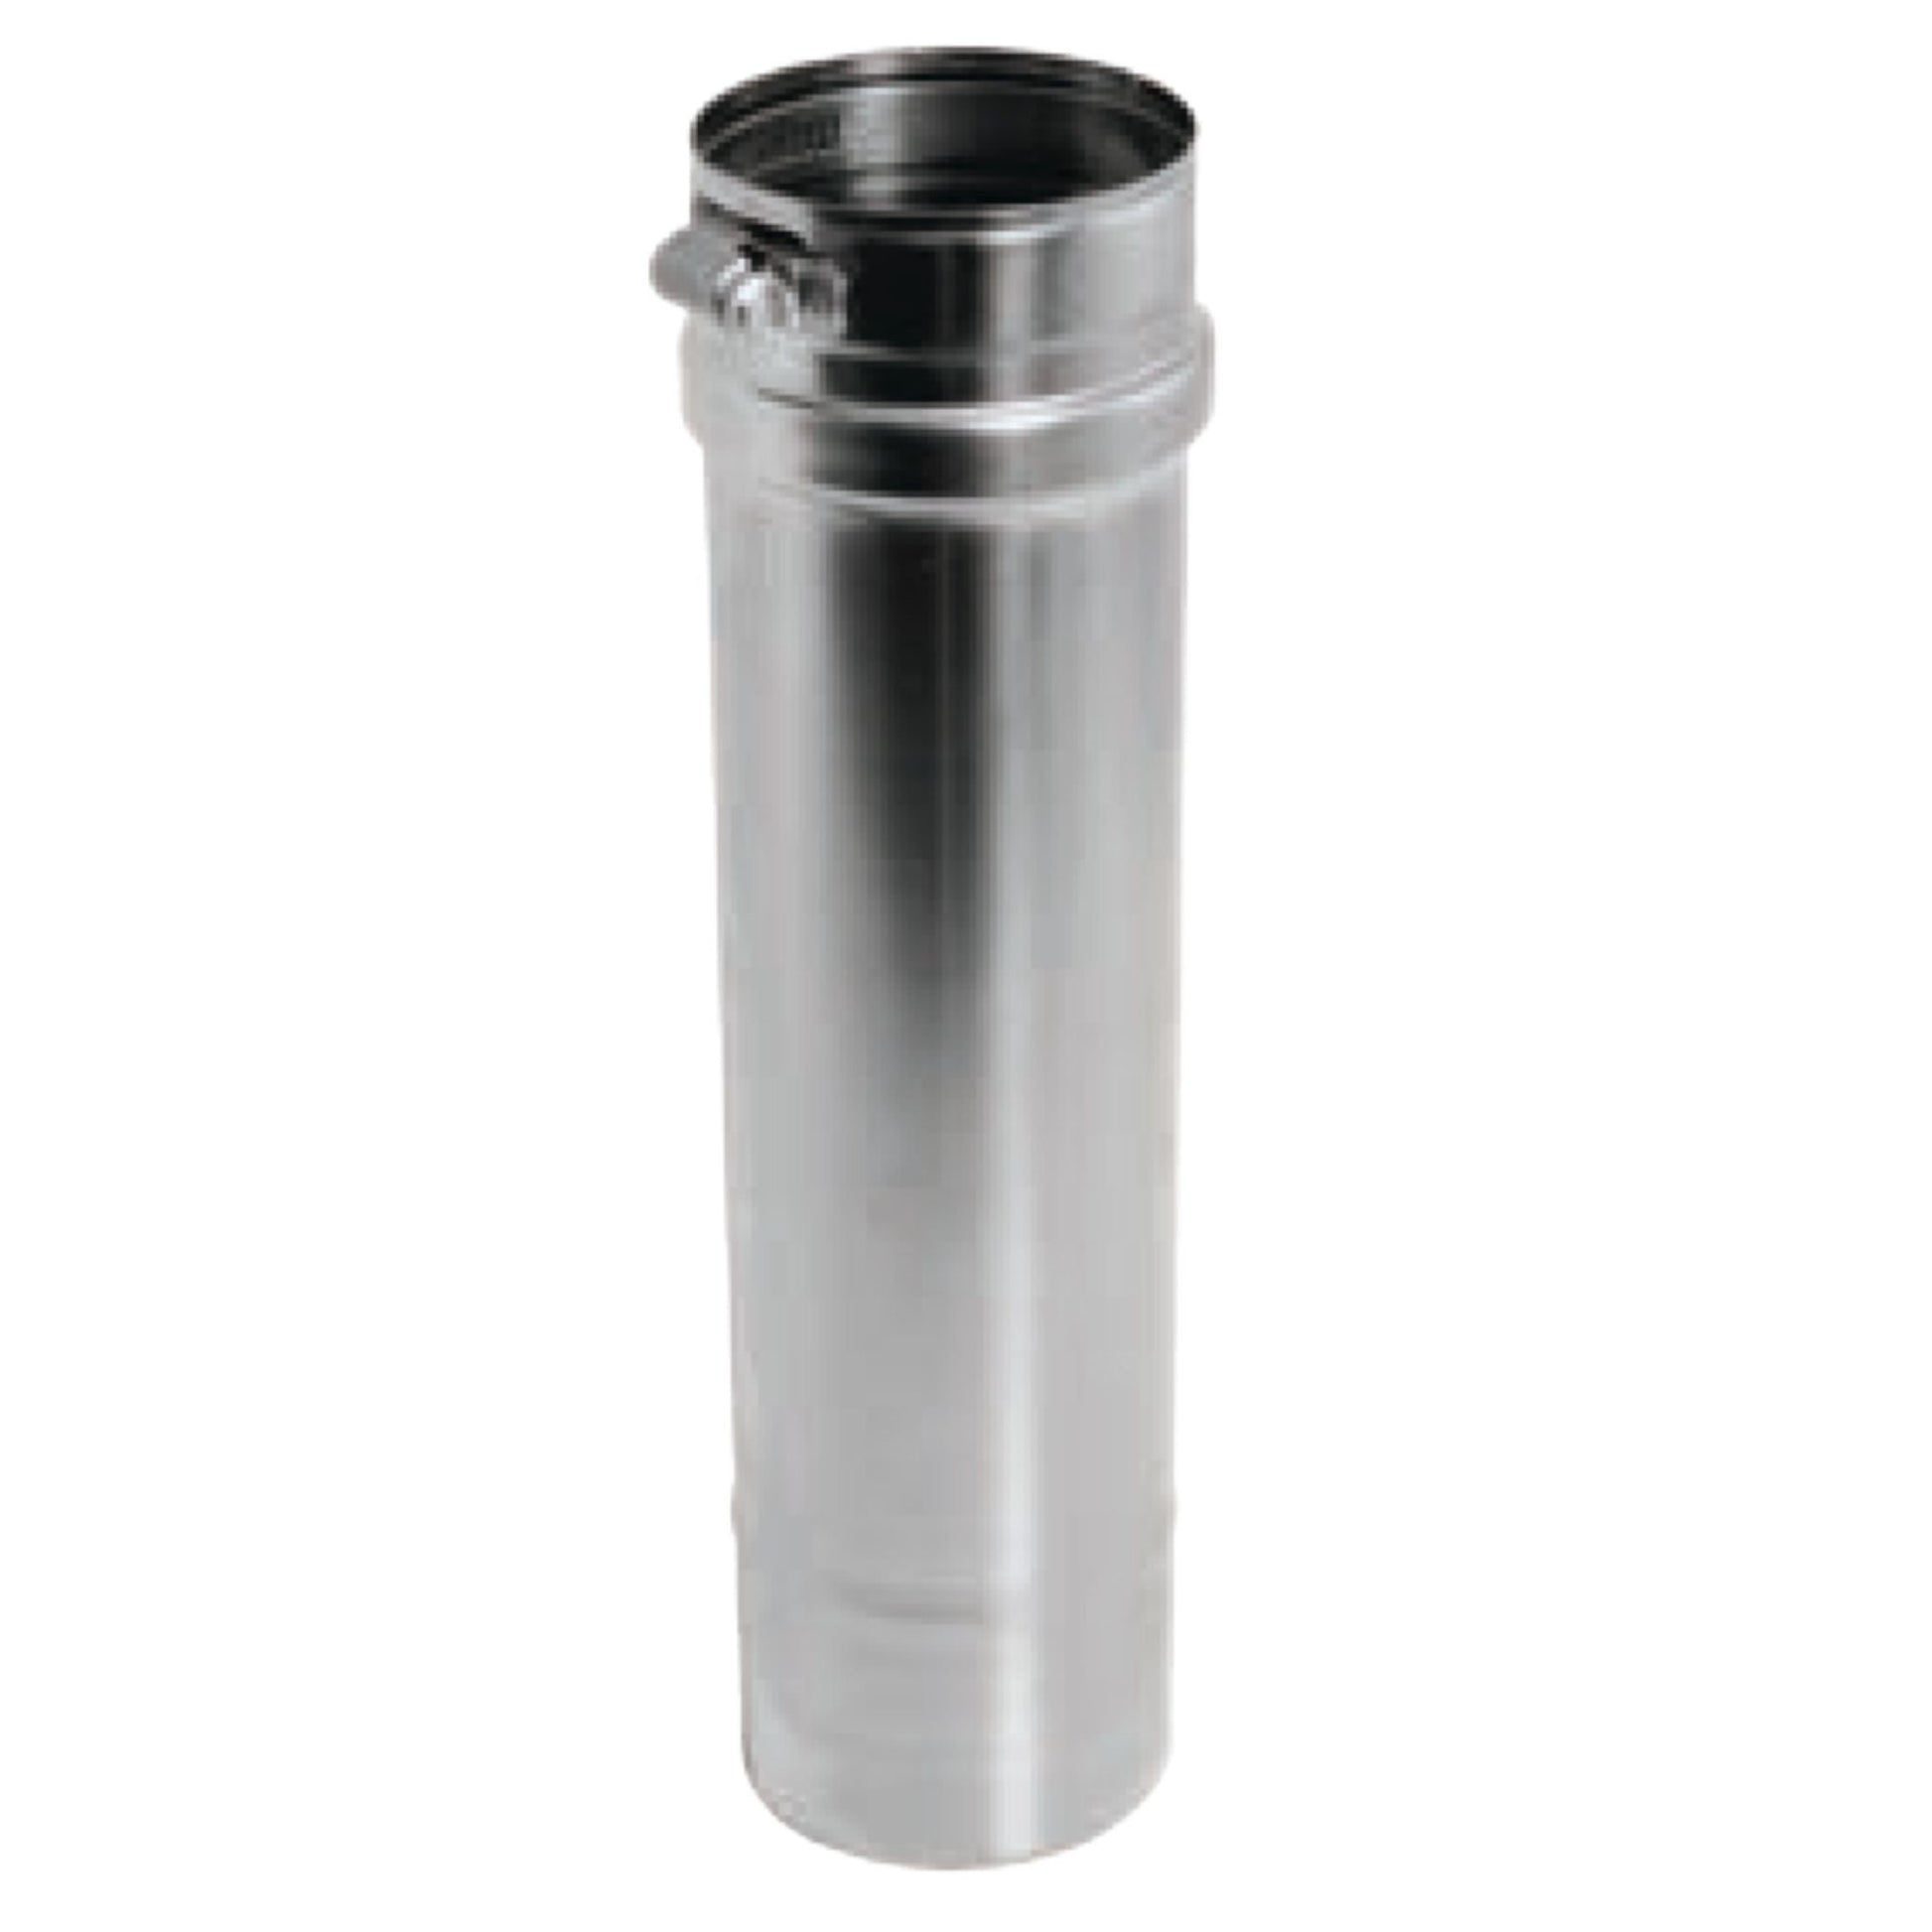 DuraVent FasNSeal 5" x 6" 316L Stainless Steel Vent Length